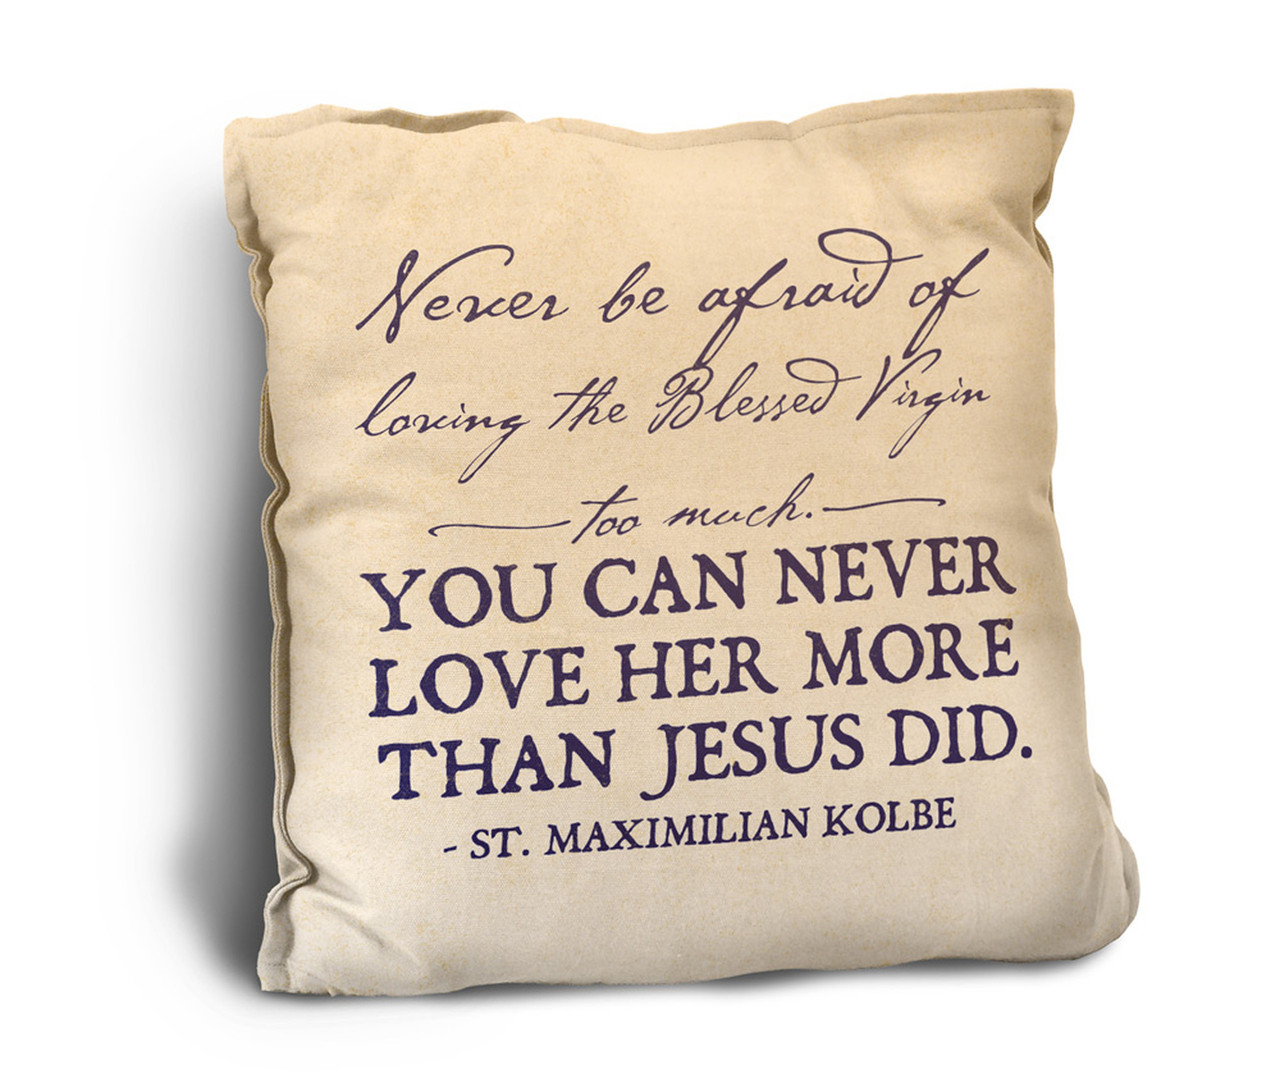 Loving the Blessed Virgin Rustic Pillow